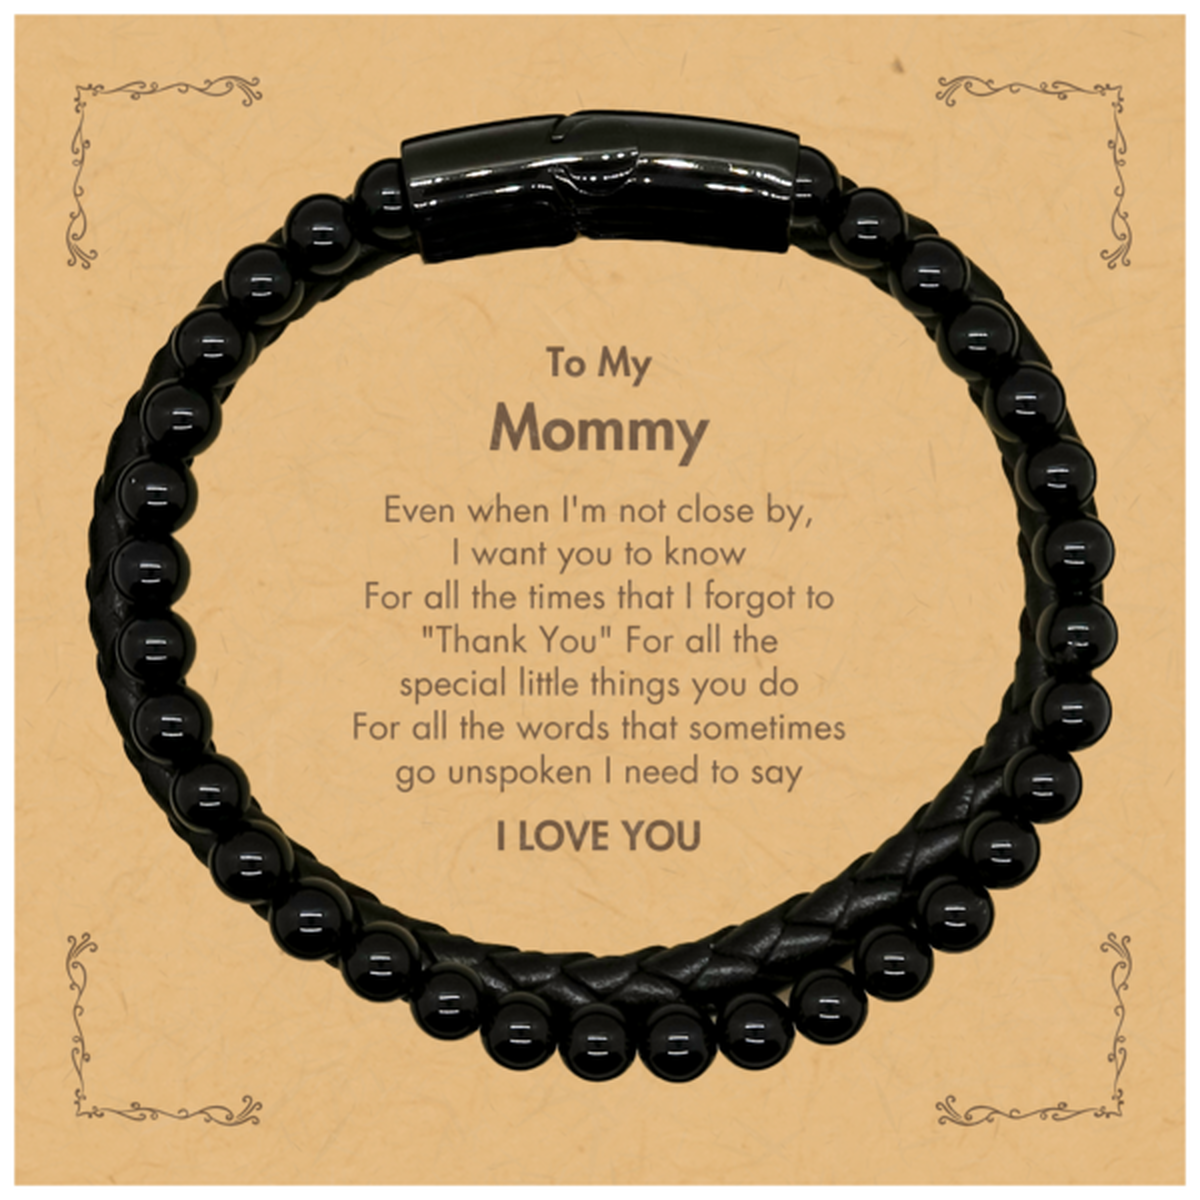 Thank You Gifts for Mommy, Keepsake Stone Leather Bracelets Gifts for Mommy Birthday Mother's day Father's Day Mommy For all the words That sometimes go unspoken I need to say I LOVE YOU